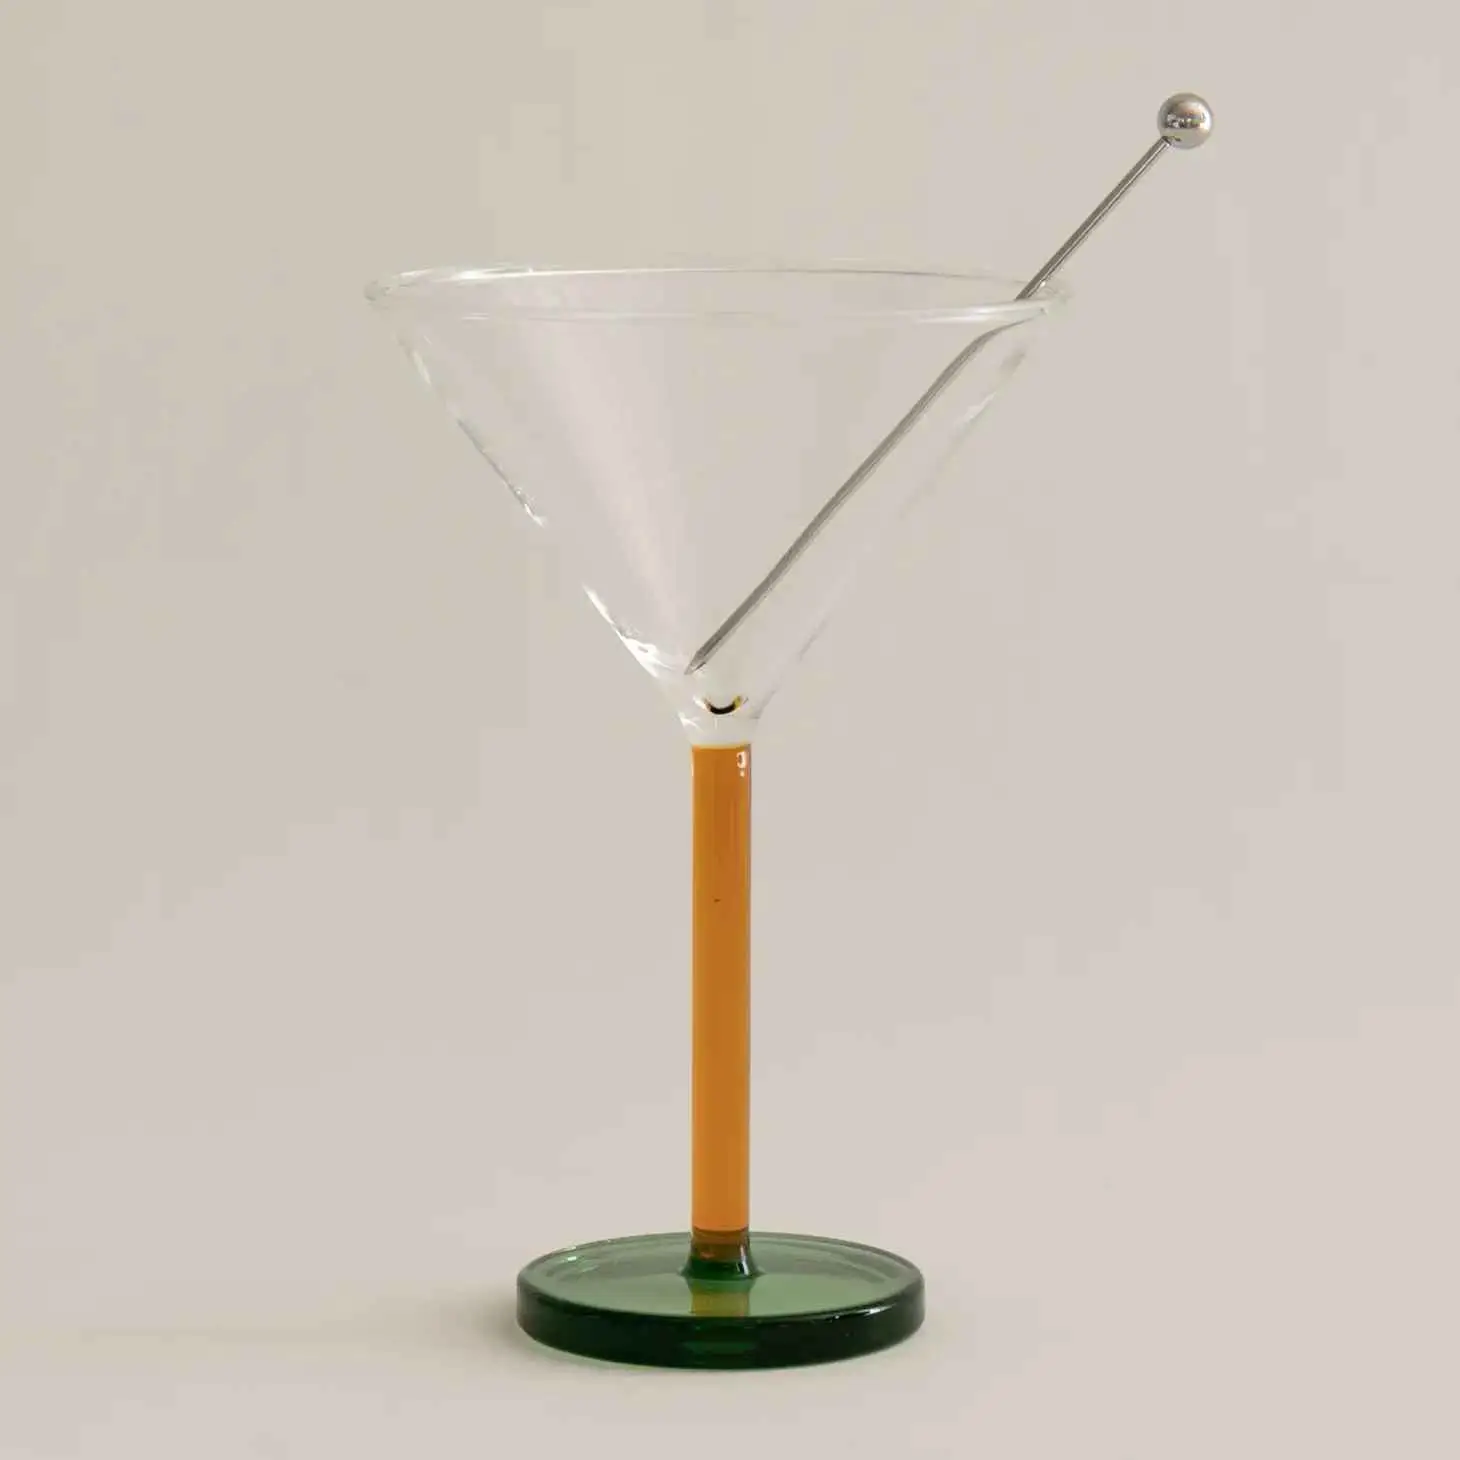 Piano Cocktail Glasses - Dizzy Delivery